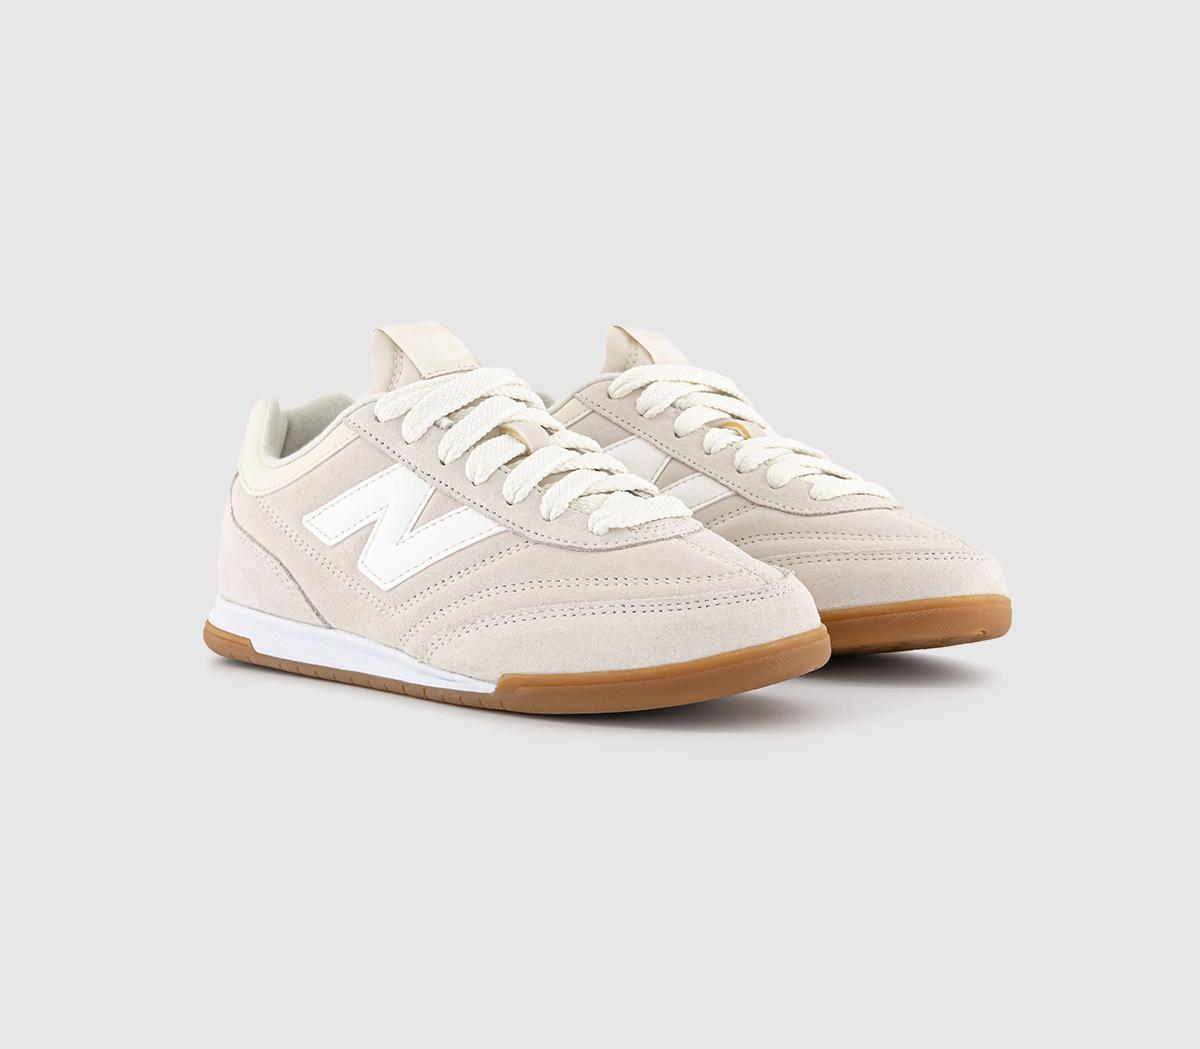 New Balance Womens RC42 Trainers Beige Suede Natural, 5